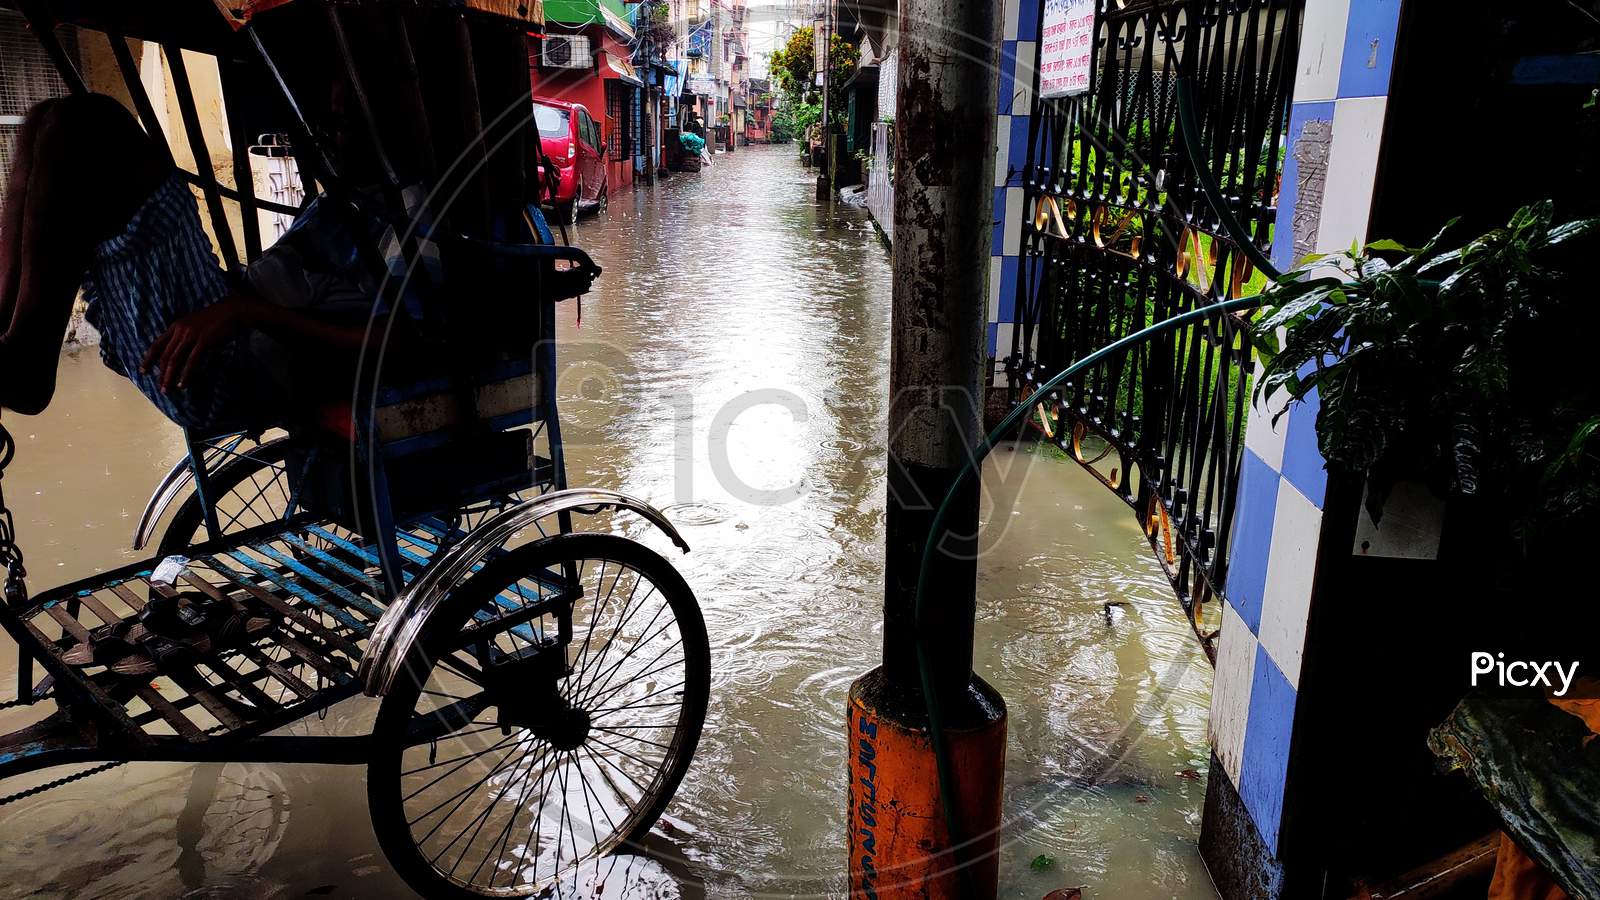 A man pulled rickshaw stands on the stage water after heavy rainfall in Kolkata, India.